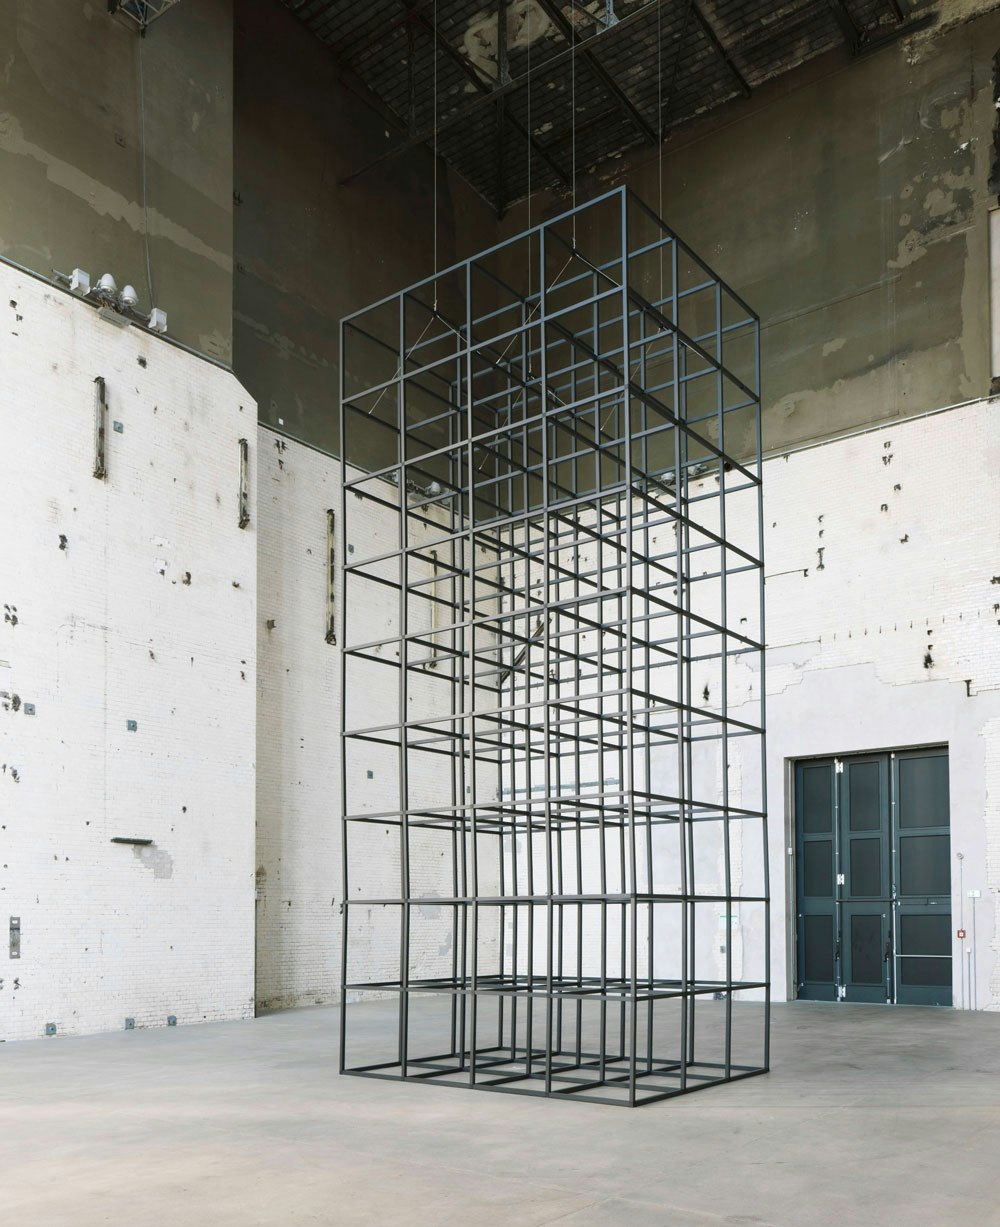 Installation view: <em>Mona Hatoum: all of a quiver</em>, KINDL – Centre for Contemporary Art, Kesselhaus, Berlin, 2022. Aluminium square tubes, steel hinges, electric motor and cable, 339 x 151 1/2 x 114 inches. Courtesy KINDL – Centre for Contemporary Art, Kesselhaus. Photo: Jens Ziehe.